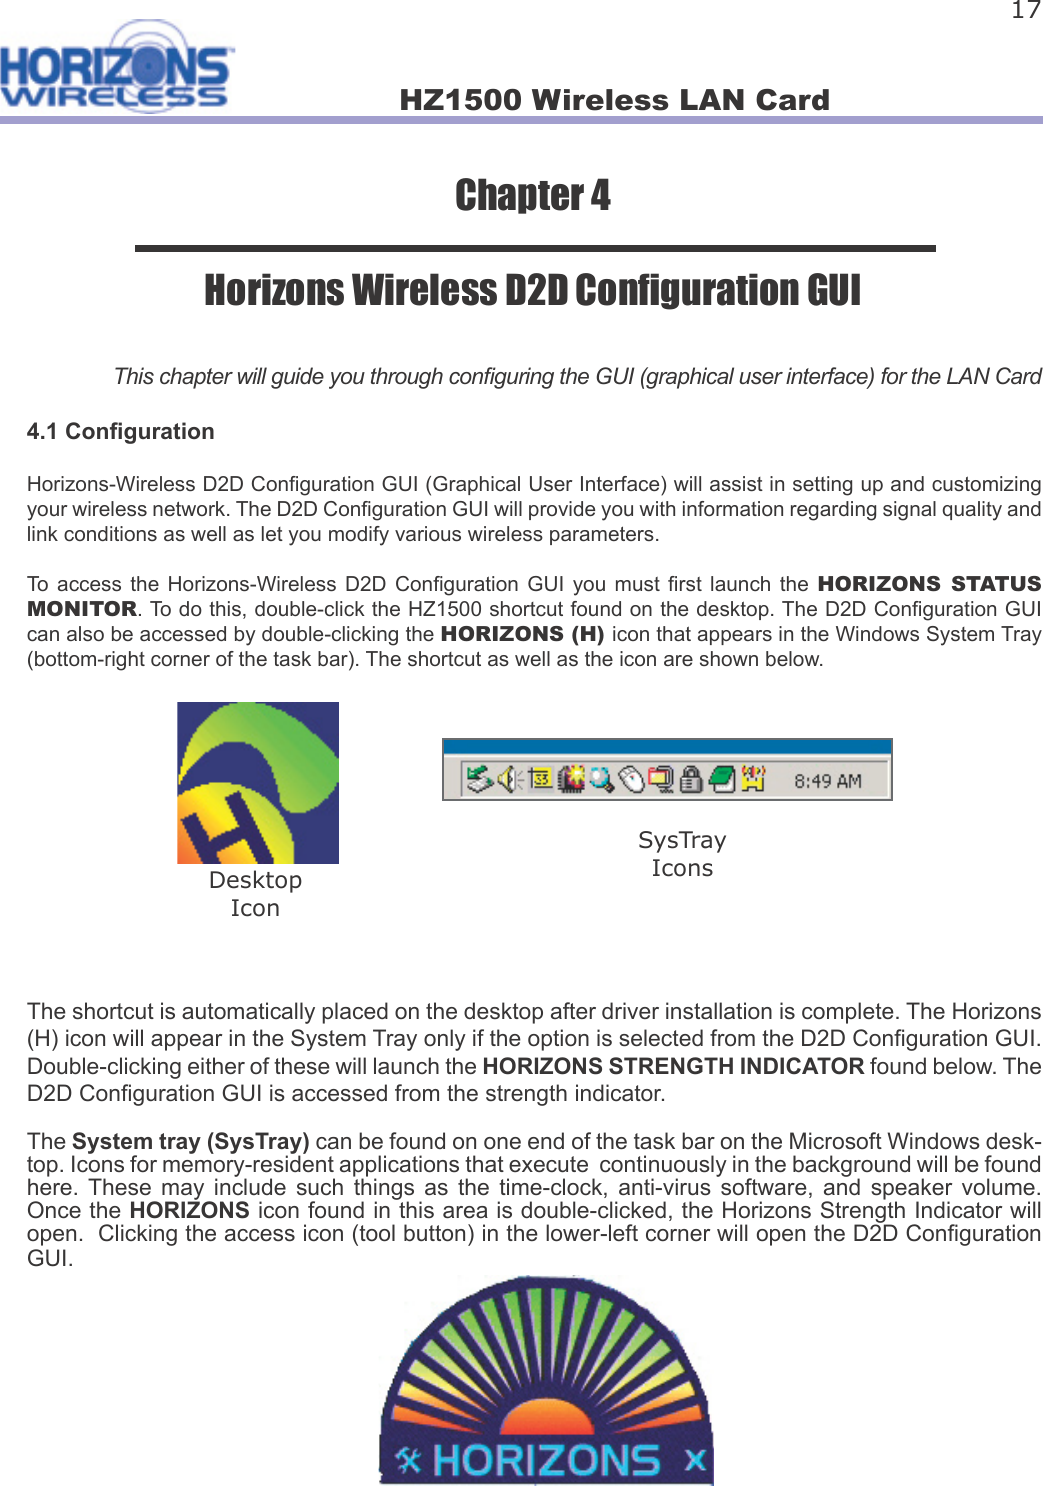 HZ1500 Wireless LAN Card 17Chapter 4Horizons Wireless D2D Con guration GUIThis chapter will guide you through con guring the GUI (graphical user interface) for the LAN Card4.1 Con gurationHorizons-Wireless D2D Con guration GUI (Graphical User Interface) will assist in setting up and customizing your wireless network. The D2D Con guration GUI will provide you with information regarding signal quality and link conditions as well as let you modify various wireless parameters.To  access  the  Horizons-Wireless  D2D  Con guration GUI  you  must   rst  launch  the  HORIZONS  STATUS MONITOR. To do this, double-click the HZ1500 shortcut found on the desktop. The D2D Con guration GUI can also be accessed by double-clicking the HORIZONS (H) icon that appears in the Windows System Tray (bottom-right corner of the task bar). The shortcut as well as the icon are shown below.The shortcut is automatically placed on the desktop after driver installation is complete. The Horizons (H) icon will appear in the System Tray only if the option is selected from the D2D Con guration GUI. Double-clicking either of these will launch the HORIZONS STRENGTH INDICATOR found below. The D2D Con guration GUI is accessed from the strength indicator.The System tray (SysTray) can be found on one end of the task bar on the Microsoft Windows desk-top. Icons for memory-resident applications that execute  continuously in the background will be found here. These  may  include  such  things  as  the  time-clock,  anti-virus  software,  and  speaker  volume. Once the HORIZONS icon found in this area is double-clicked, the Horizons Strength Indicator will open.  Clicking the access icon (tool button) in the lower-left corner will open the D2D Con guration GUI.  DesktopIconSysTrayIcons